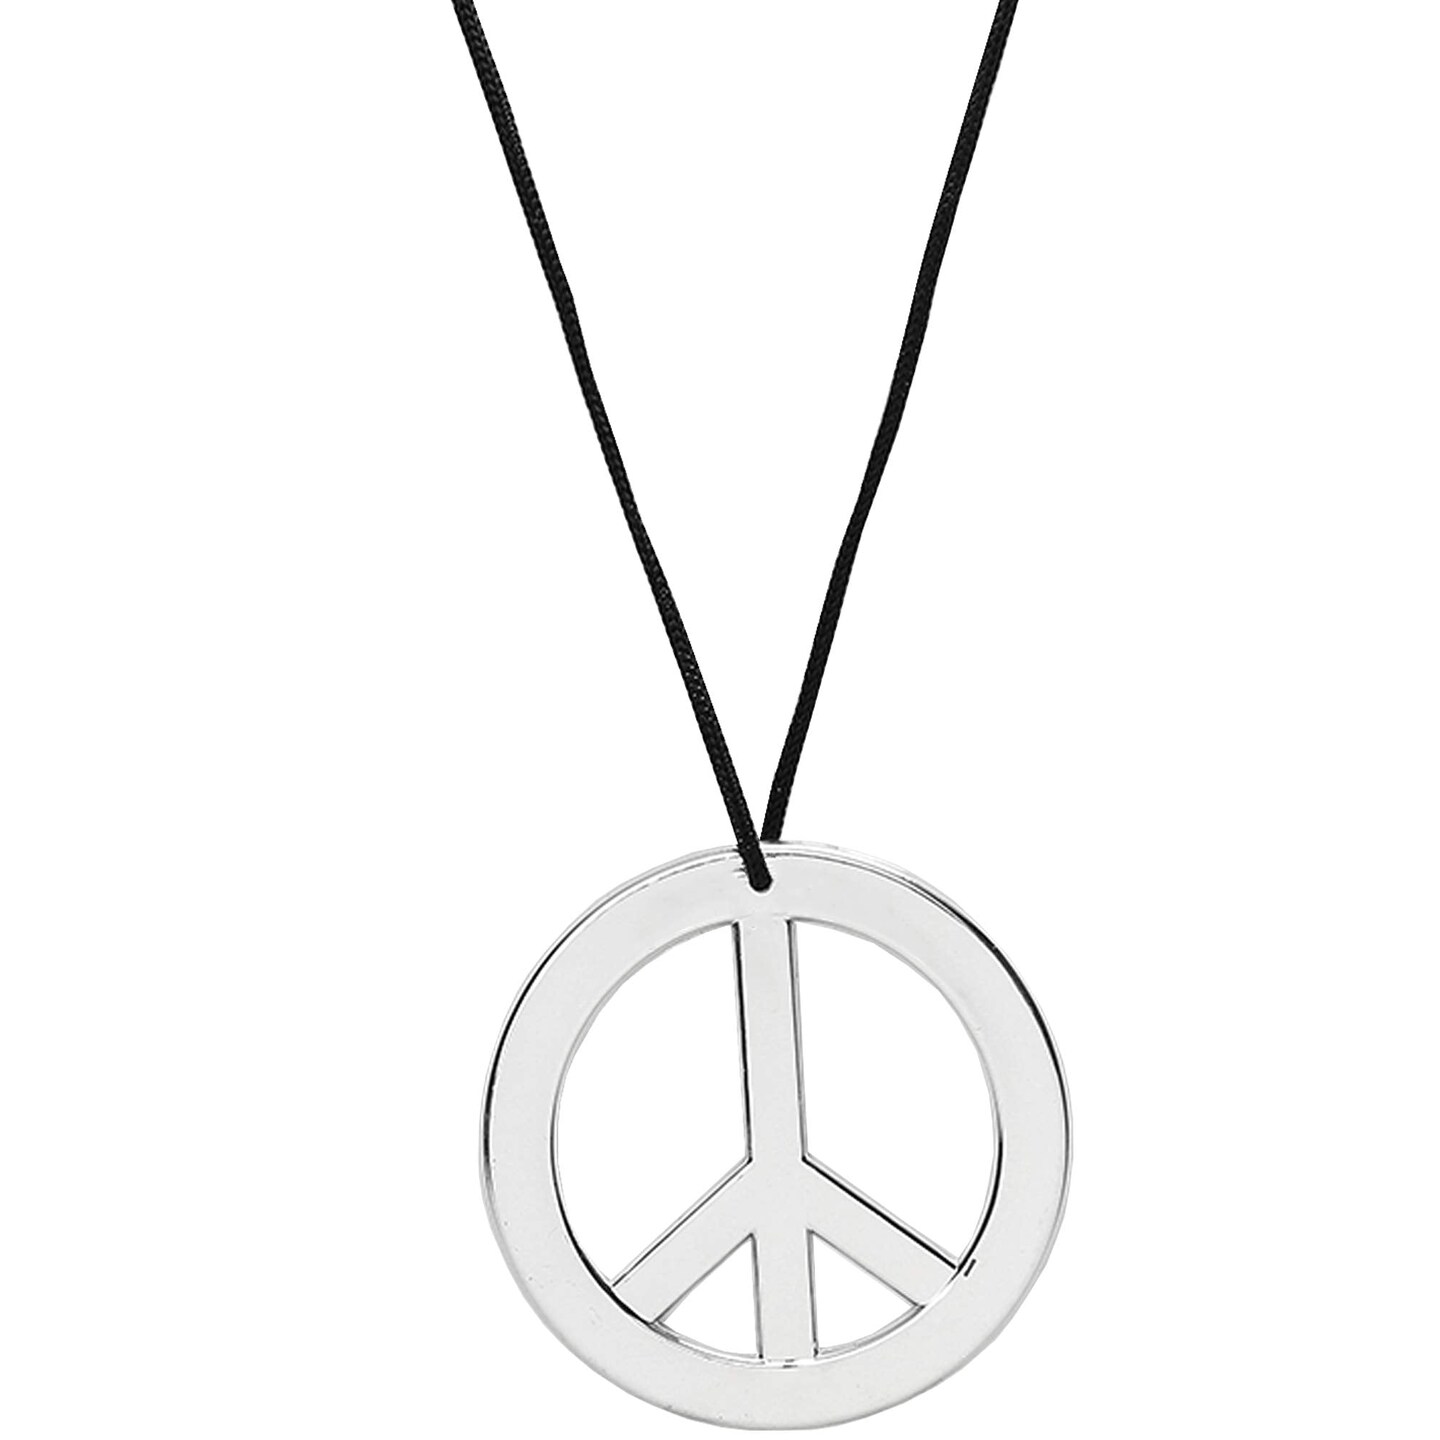 M Men Style Peace Sign Symbol In Heart Shape Silver Stainless Steel Pendant  Necklace Chain For